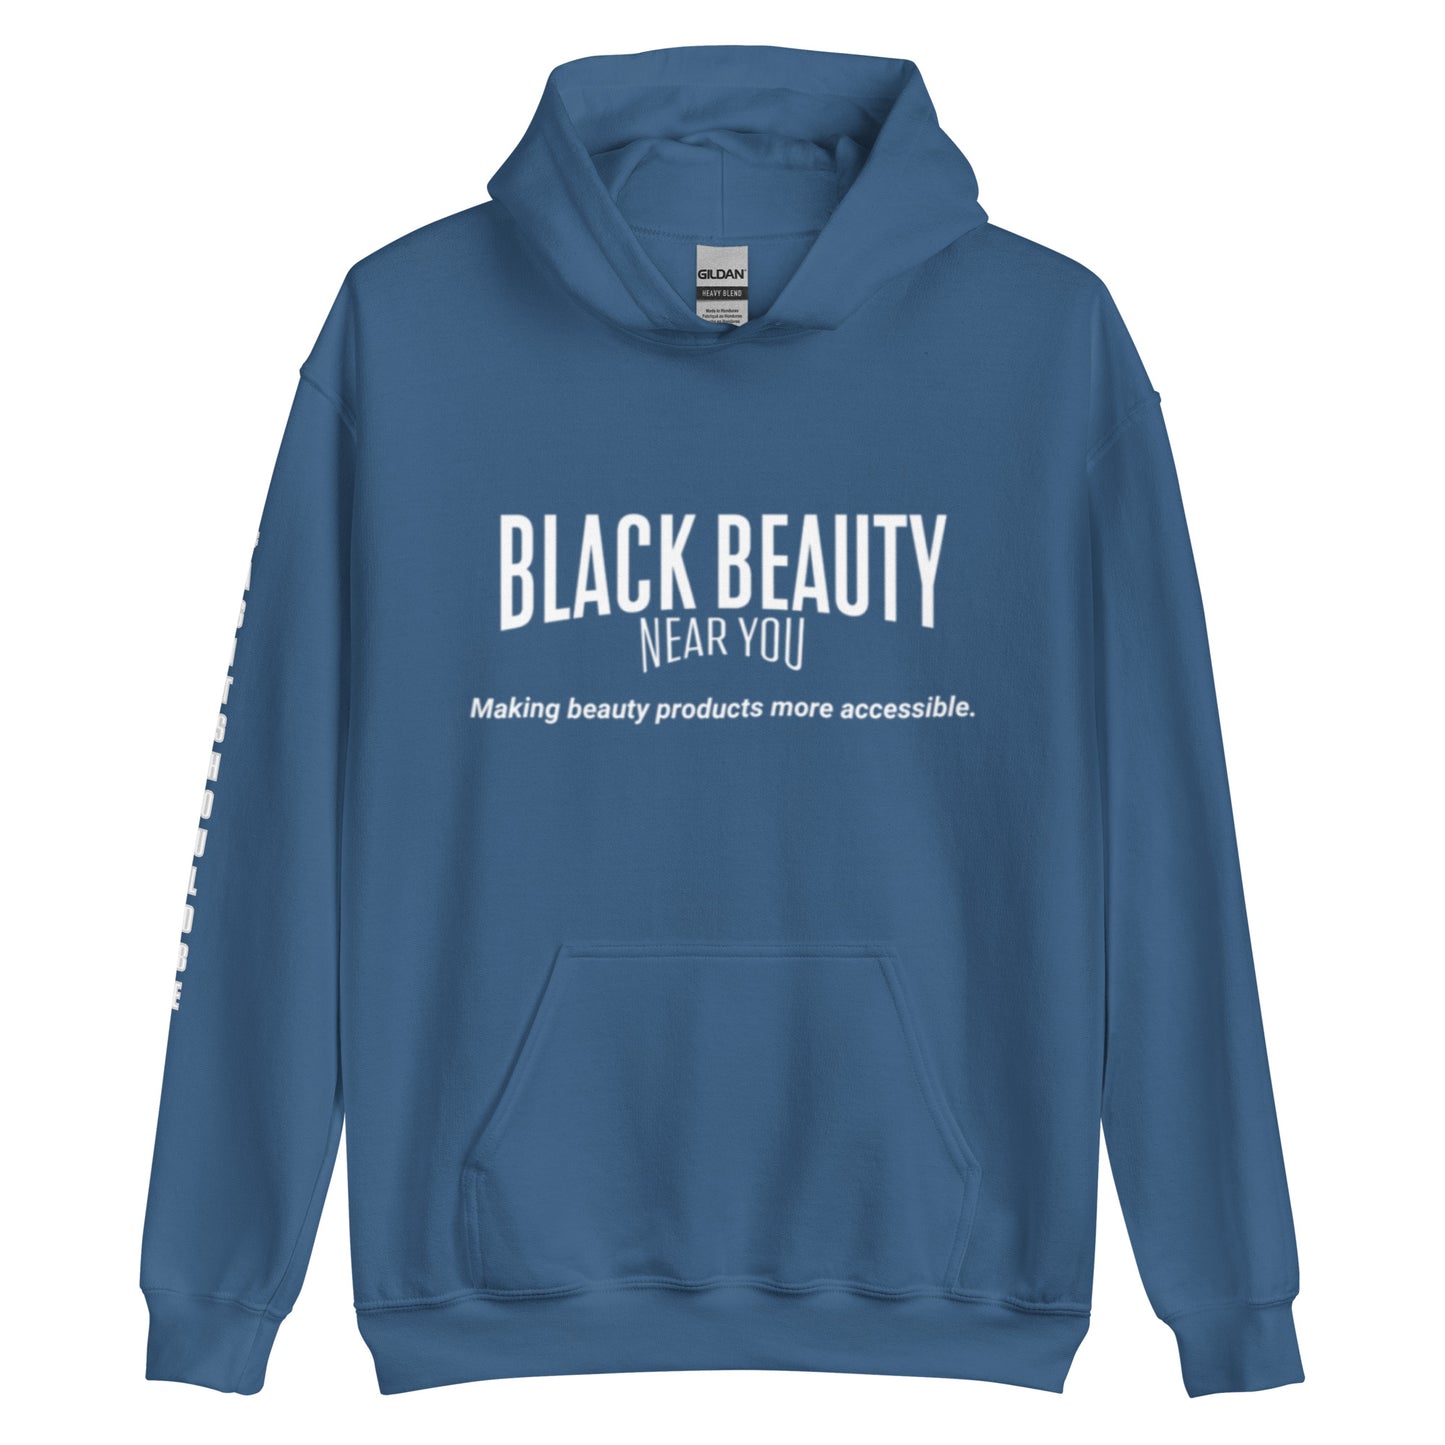 BBNY Unisex Hoodie - COLORS - #ASITSHOULDBE on Right Sleeve [White Logo Color]